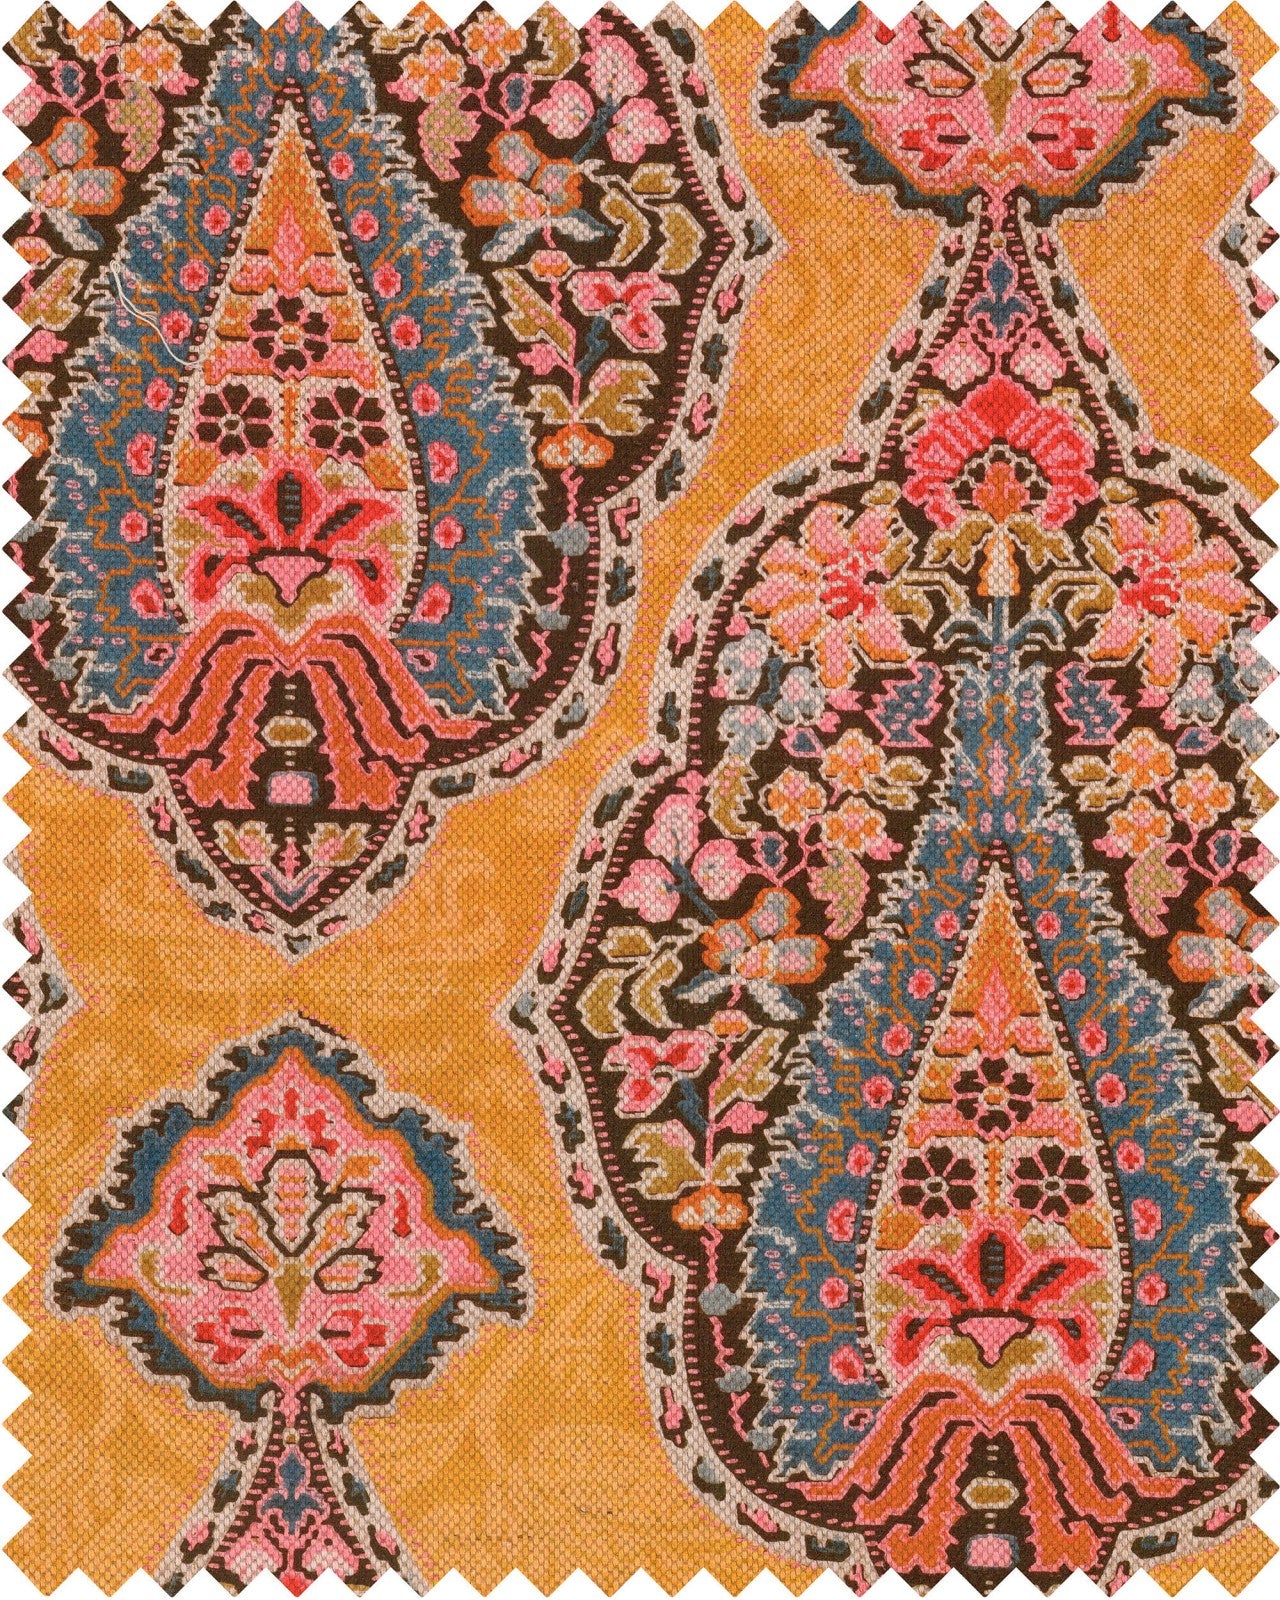 Gypsy Soul fabric in yellow pink blue color - pattern number FB00070 - by Mind The Gap in the Woodstock collection